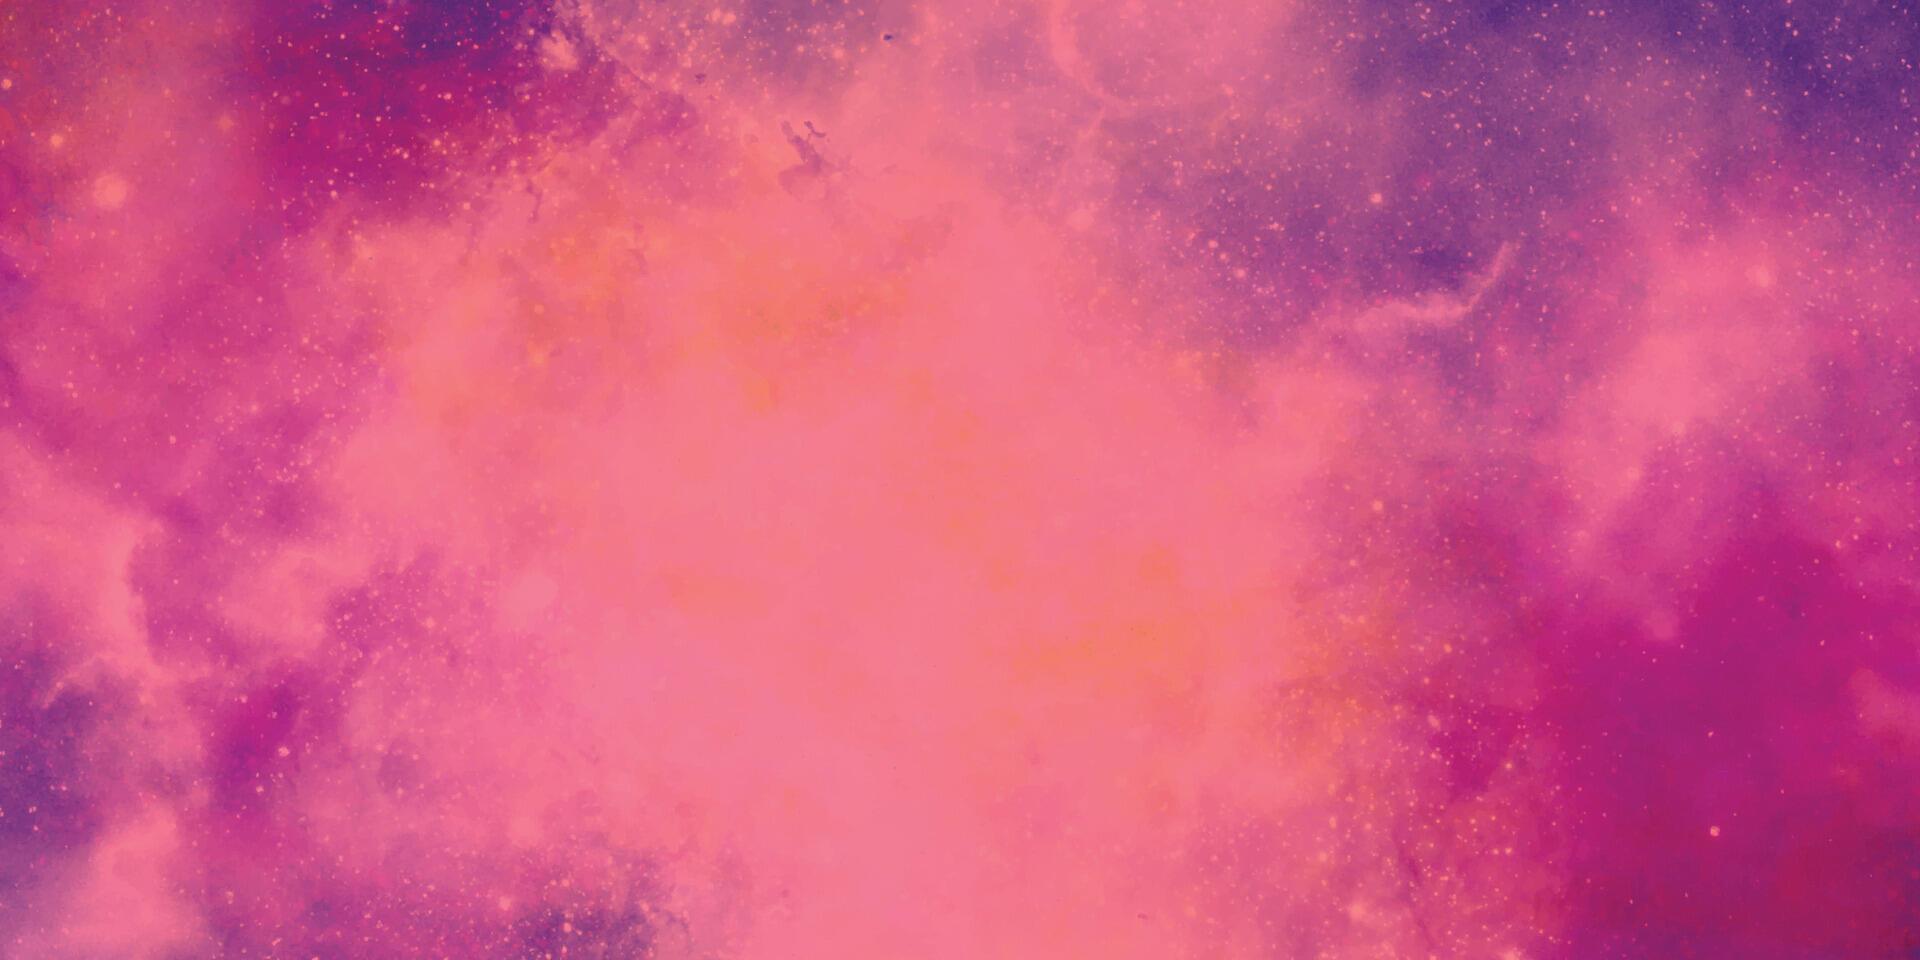 Colorful watercolor background with space. Sky galaxy, universe, background with clouds and sparkling. Abstract grunge texture background. vector